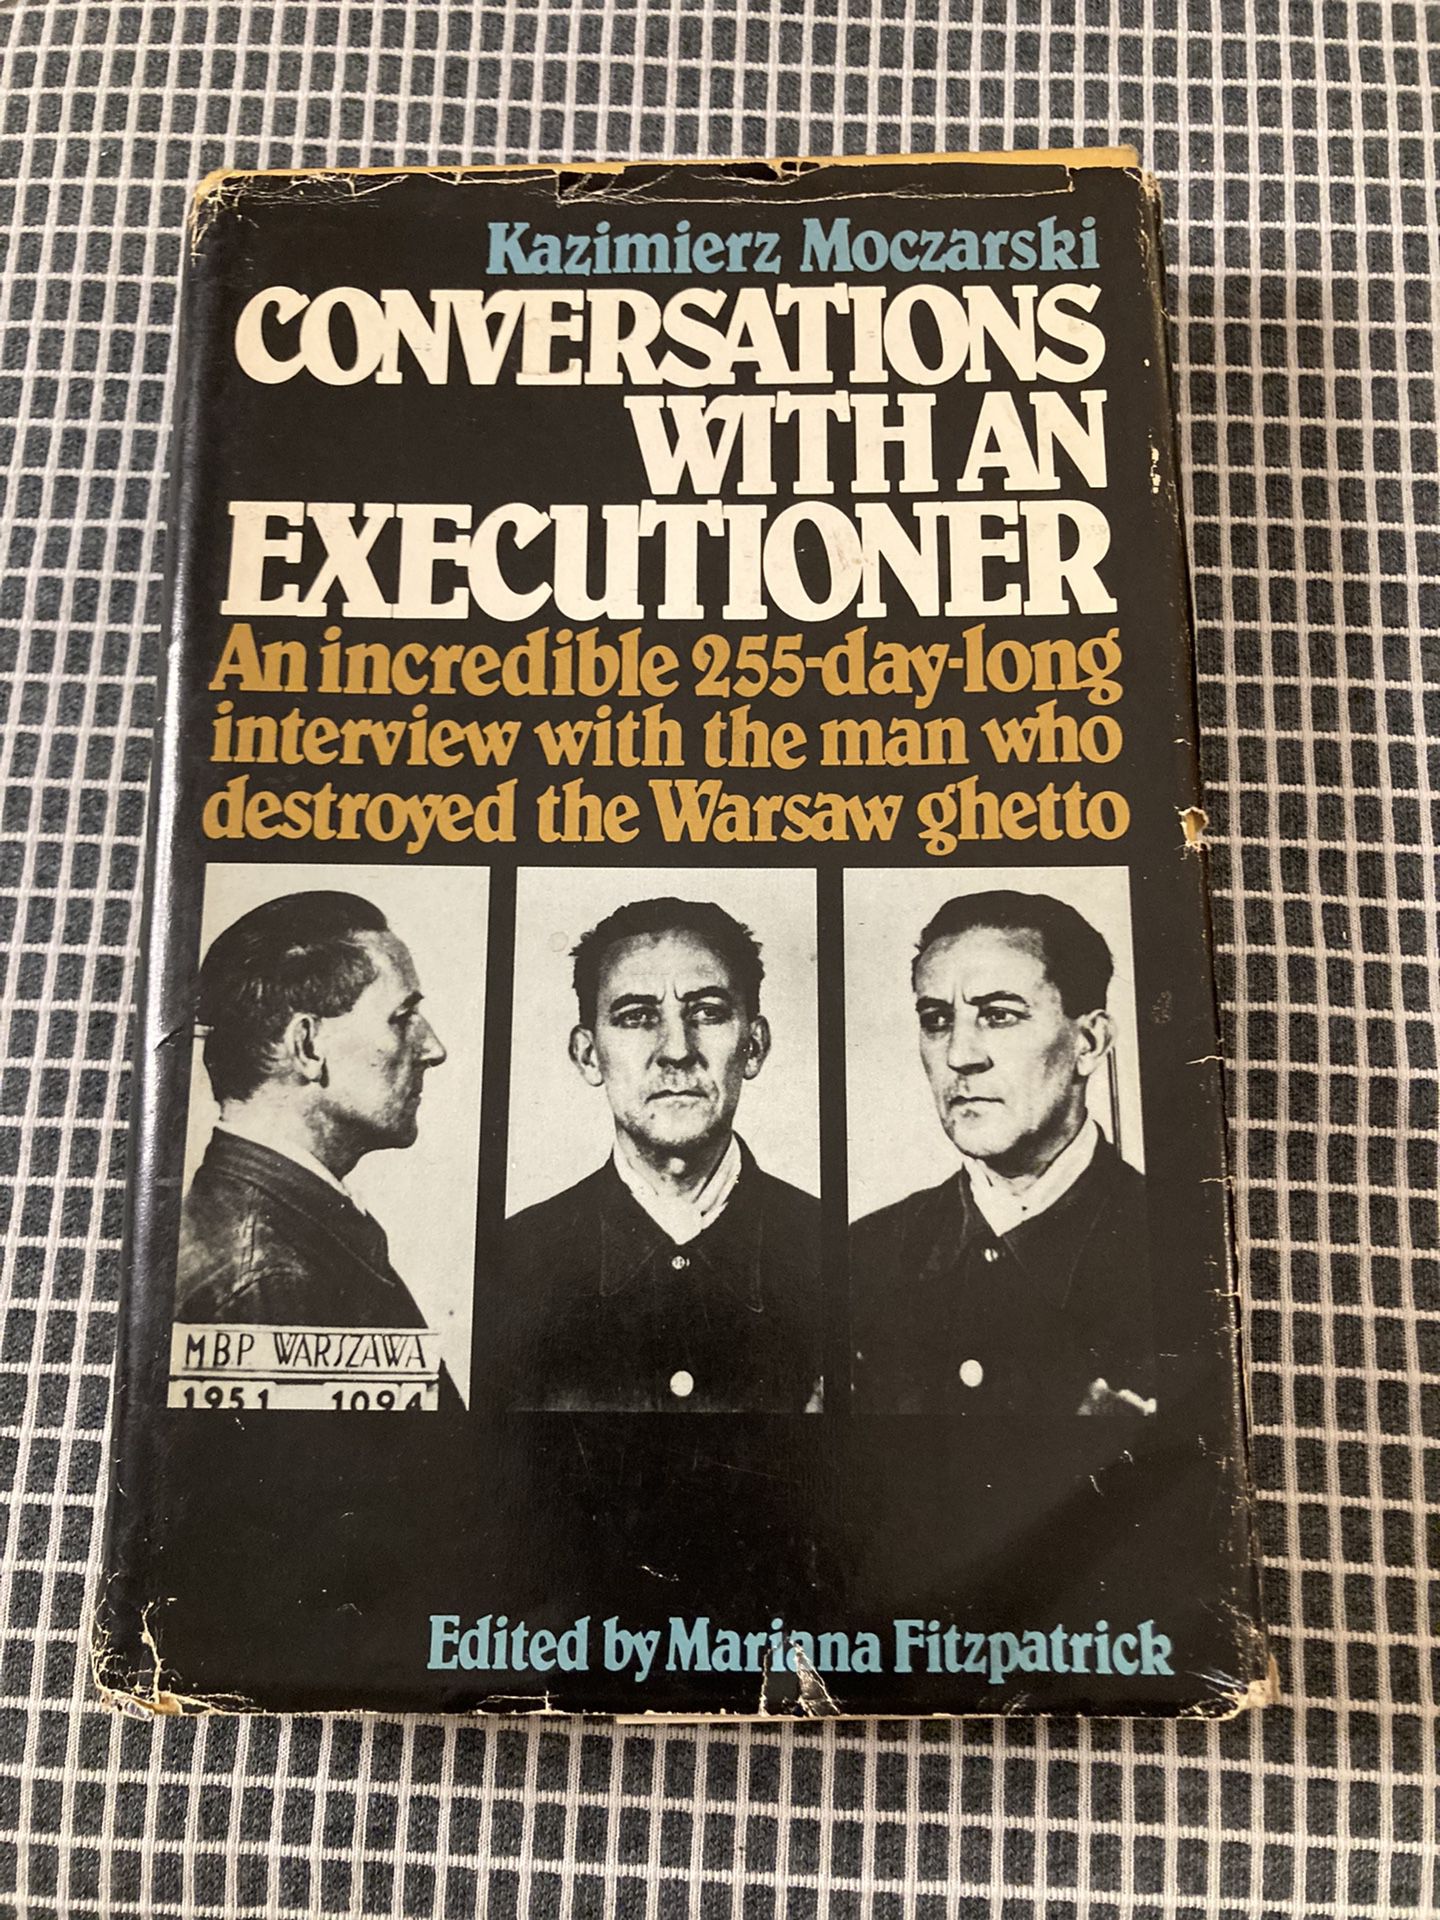 Conversations With An Executioner By Kazimierz Moczarski (non-fiction book)